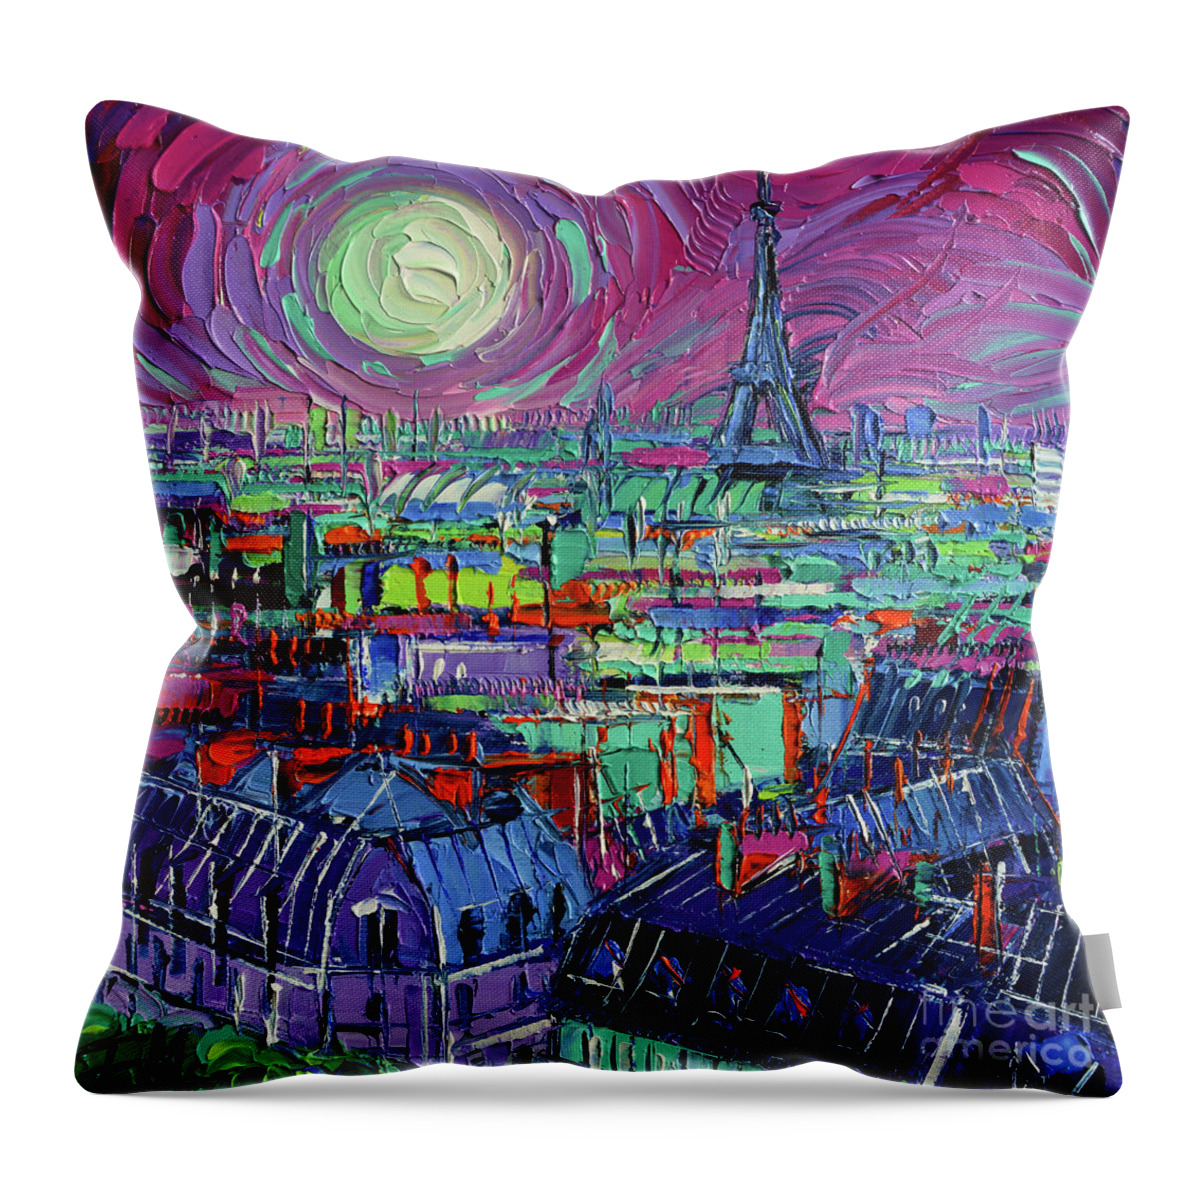 Paris By Moonlight Throw Pillow featuring the painting Paris By Moonlight by Mona Edulesco